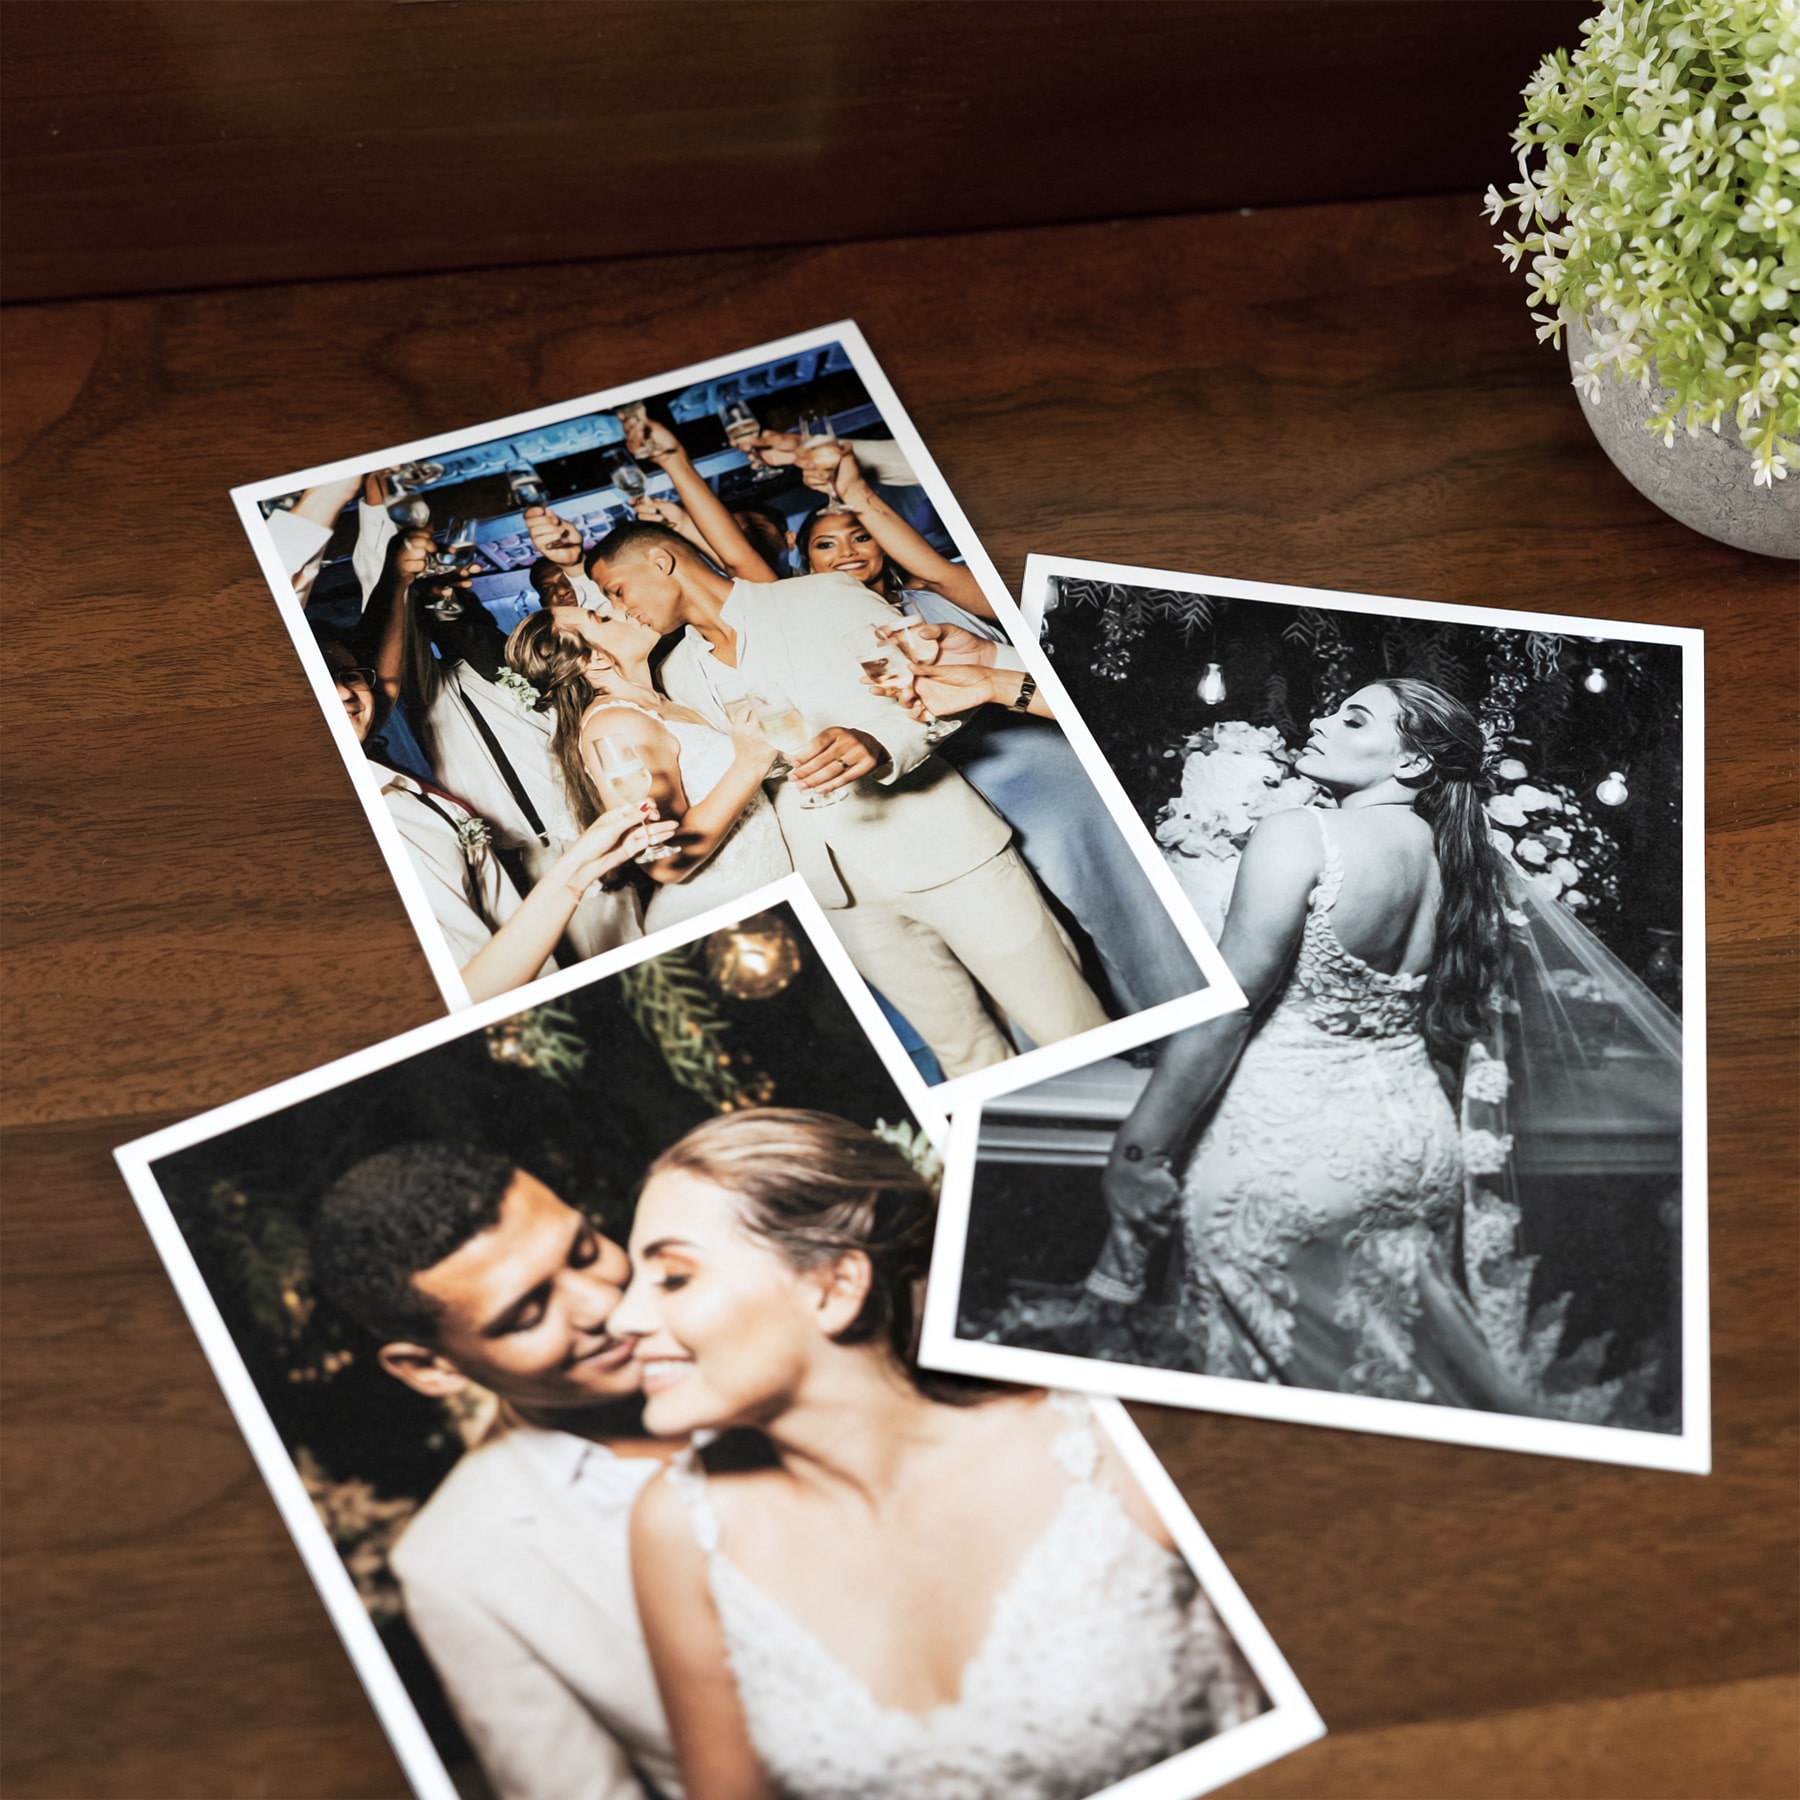 Wedding reception and party photos displayed on table